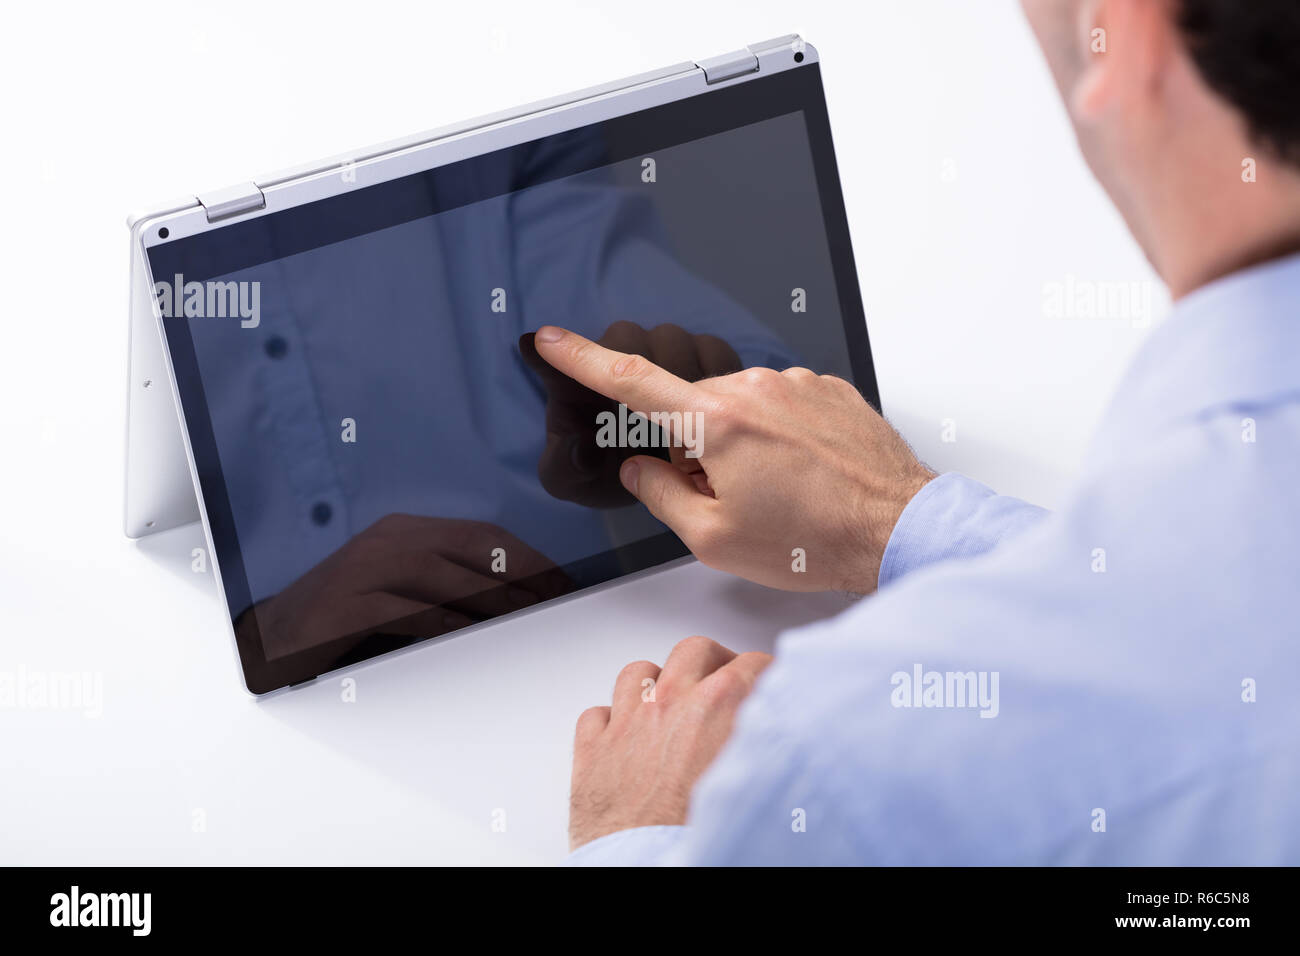 Man Touching Hybrid Laptop Screen With Finger Stock Photo